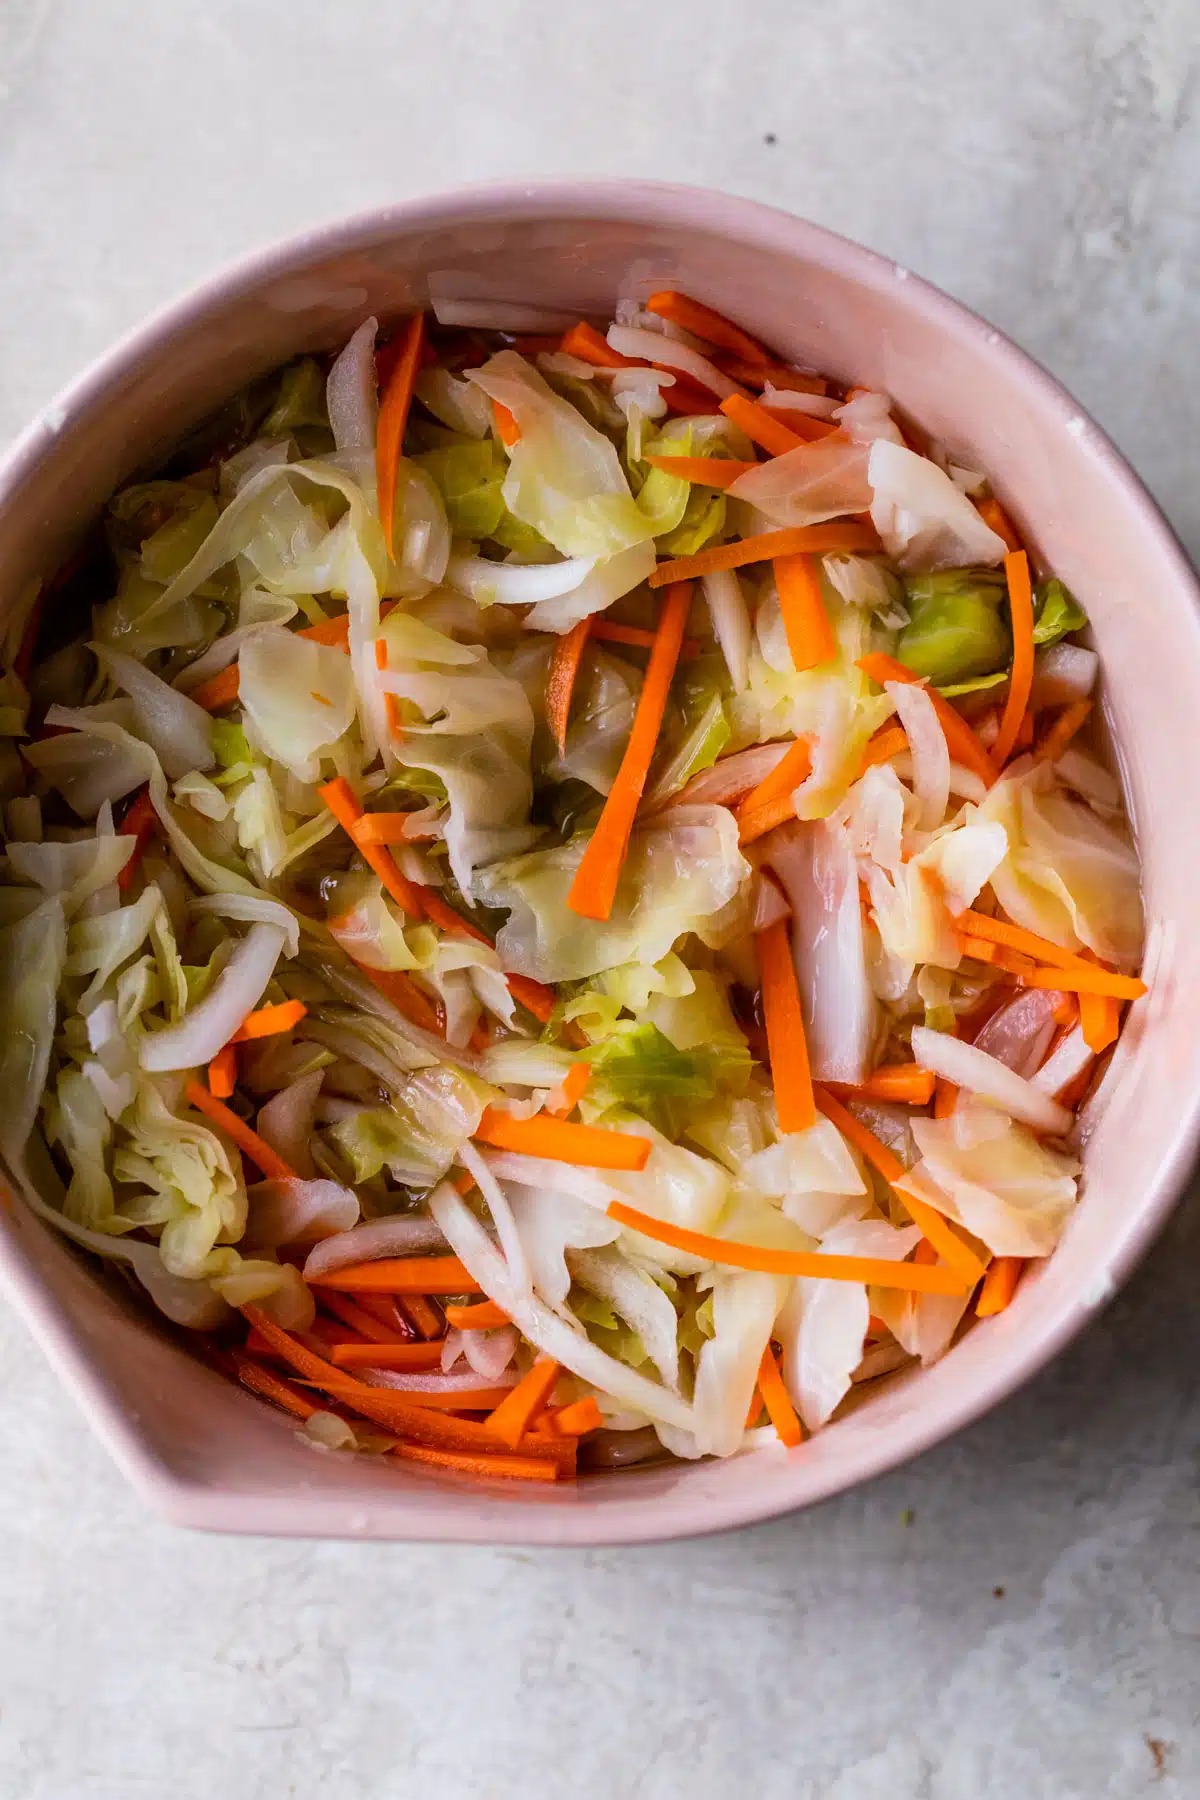 a bowl filled with cabbage, carrots and sliced onion